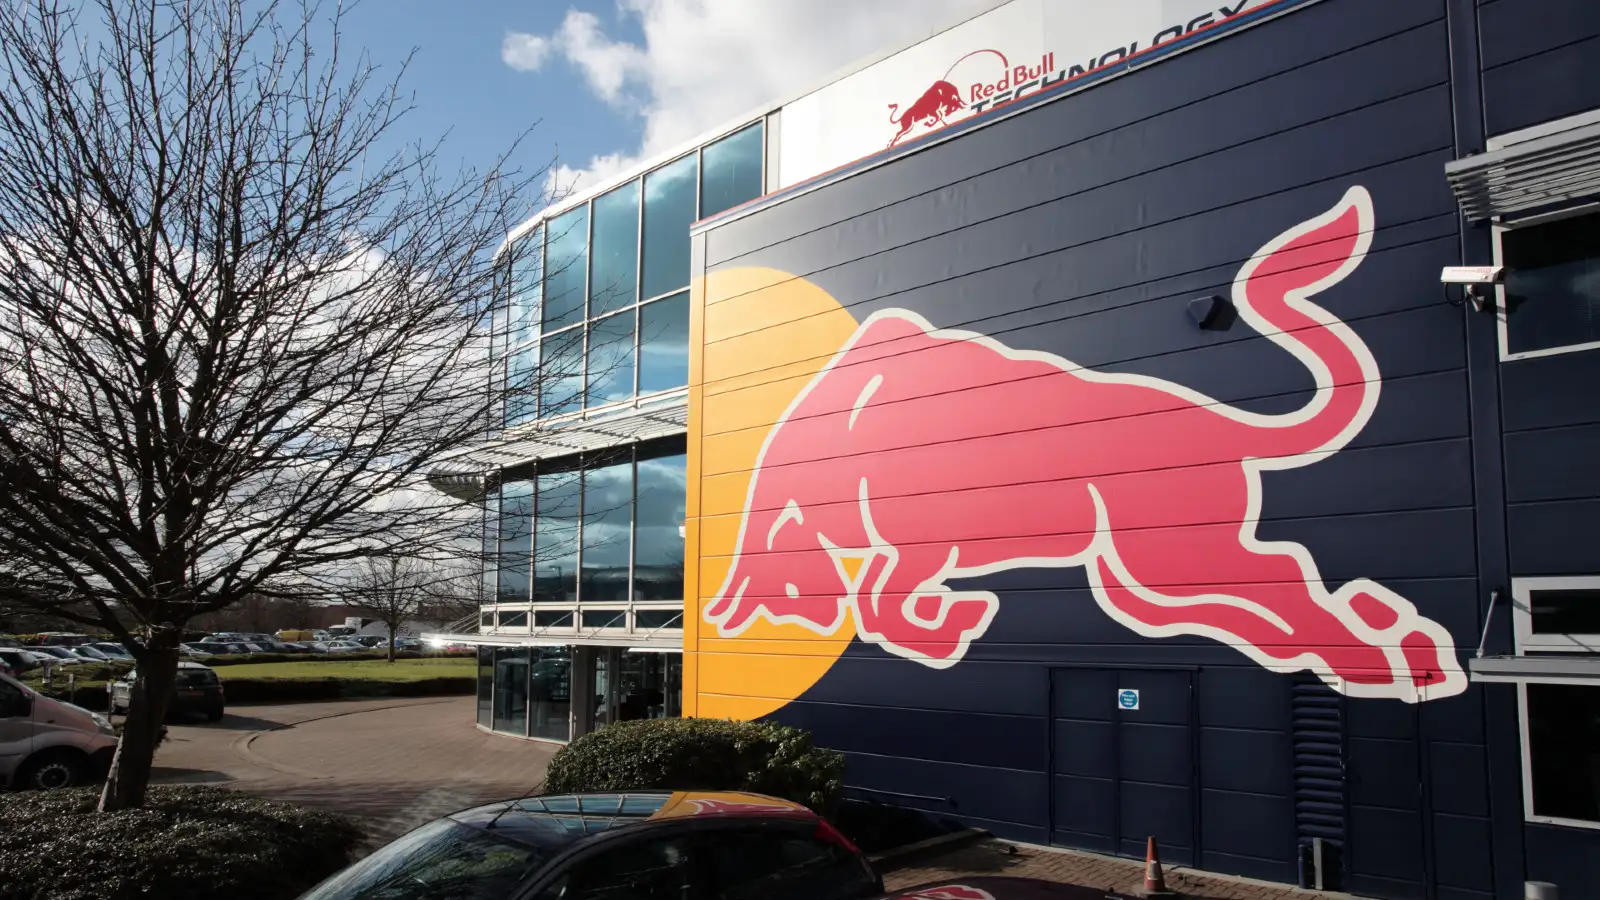 The Red Bull F1 factory, located in Milton Keynes in the UK.